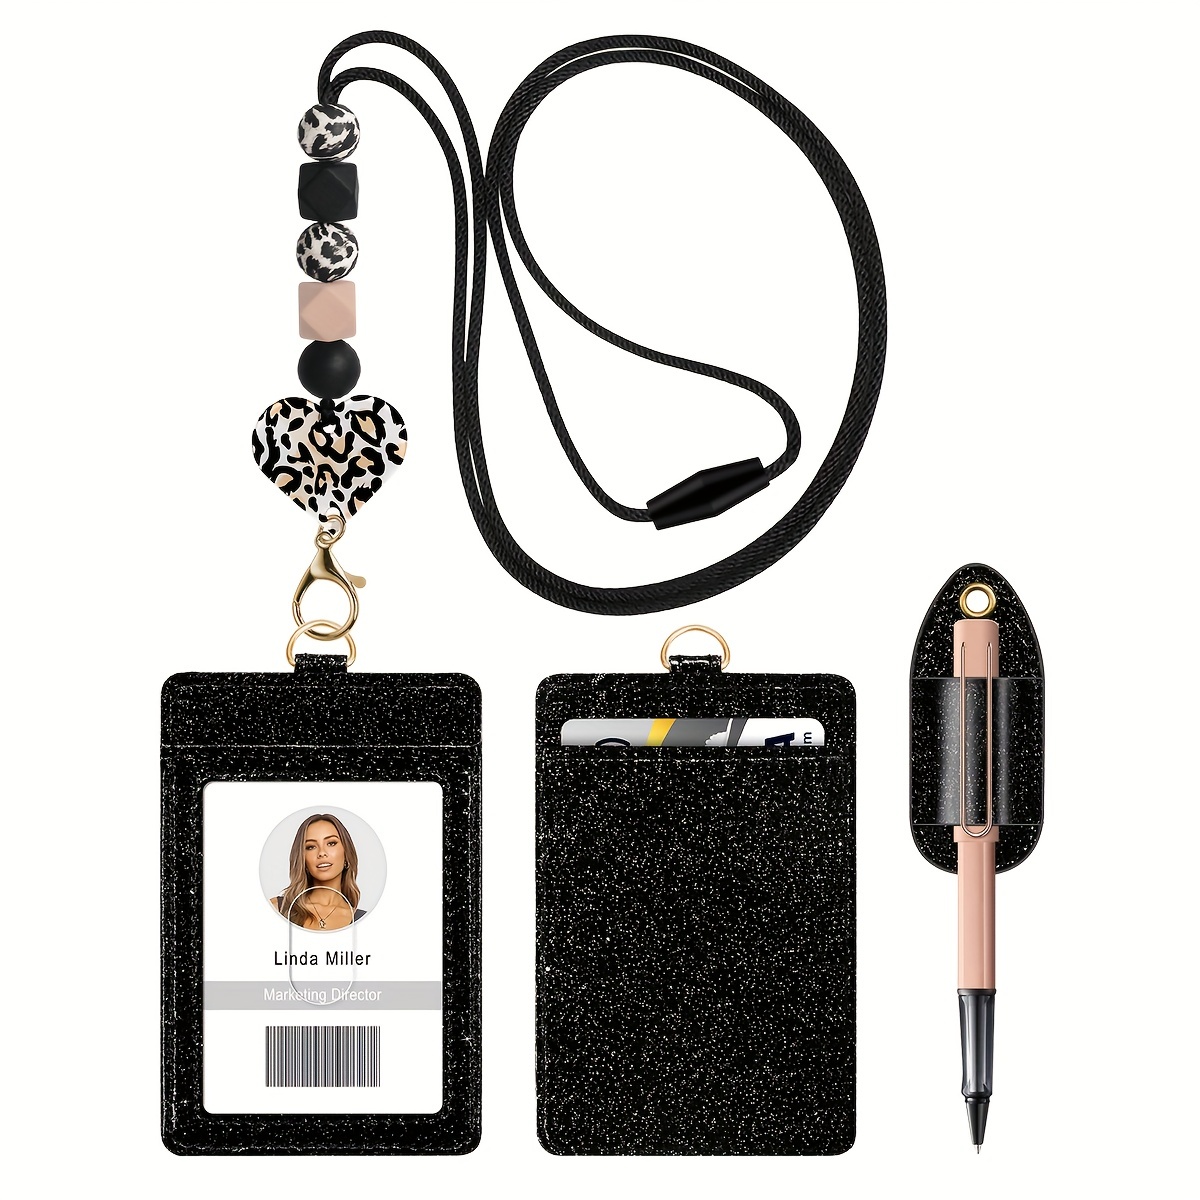  Id Badge Holder With Pen Holder